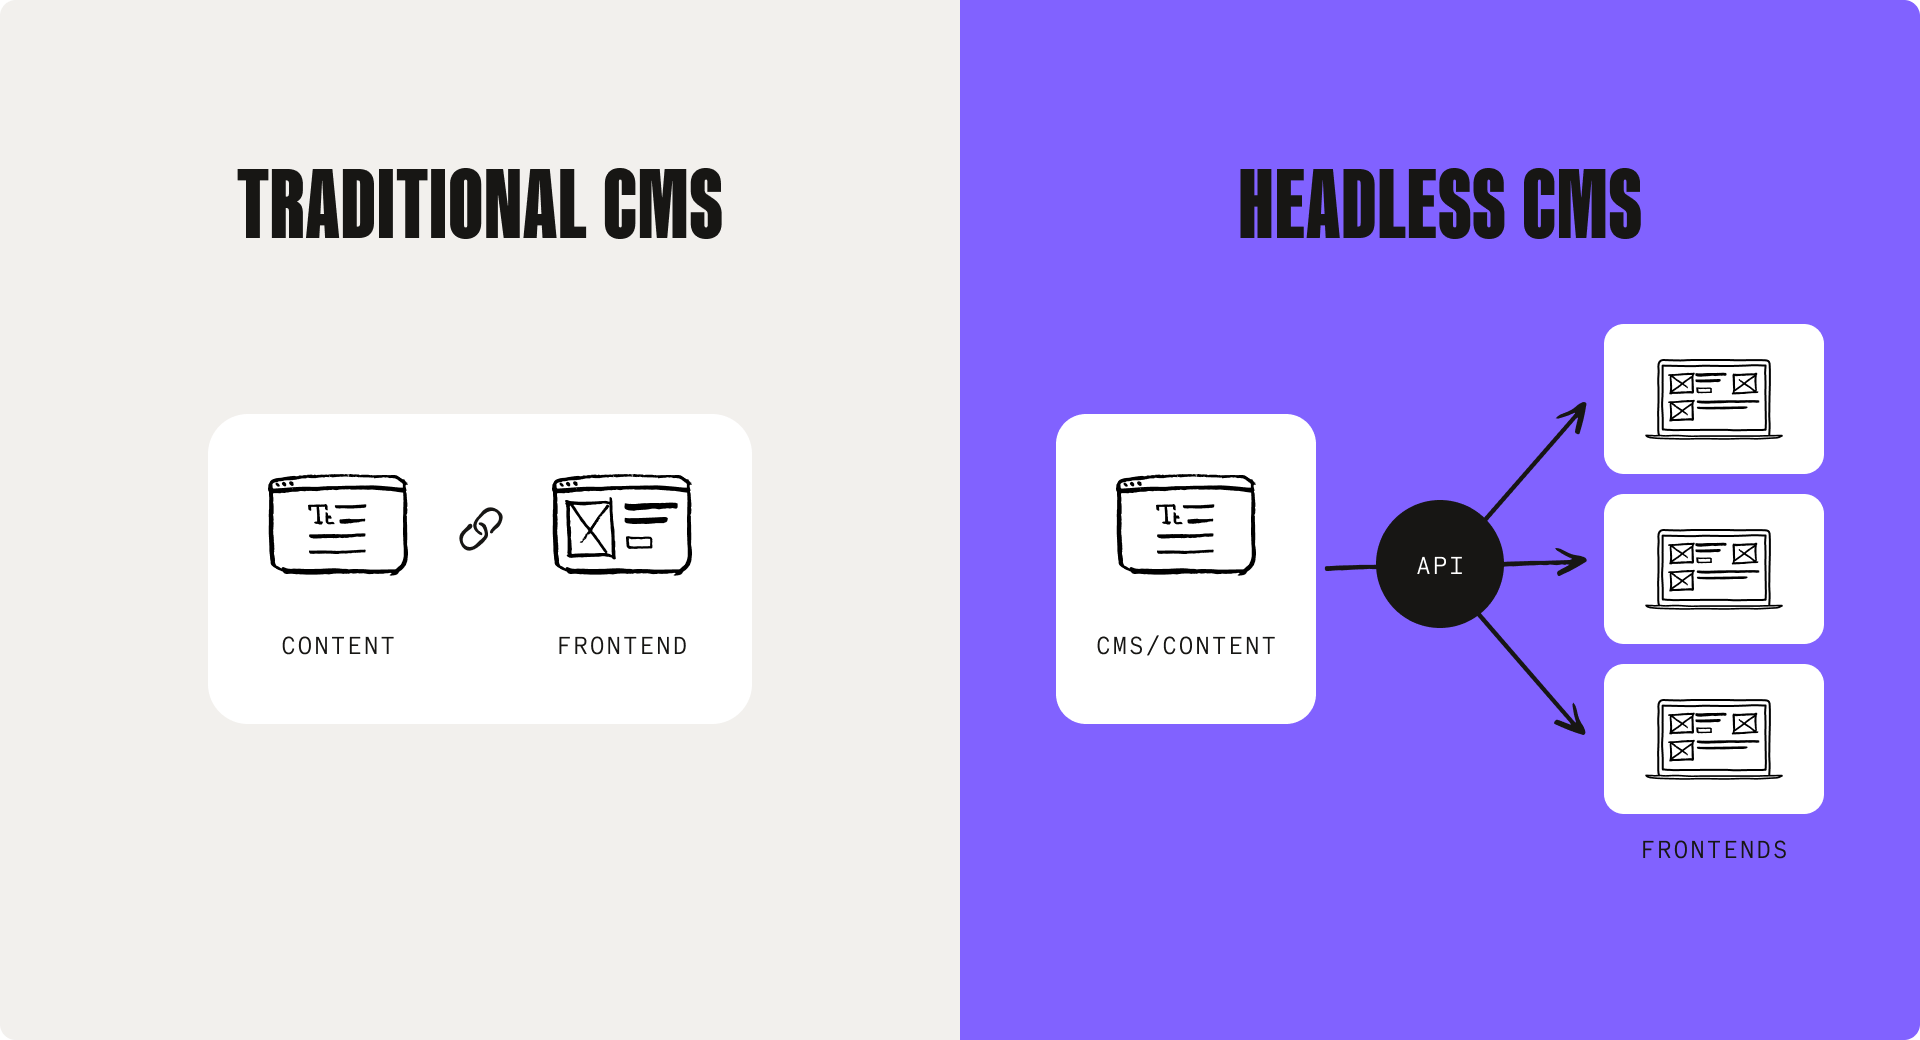 Diagram showing the set up for a traditional CMS vs a headless CMS